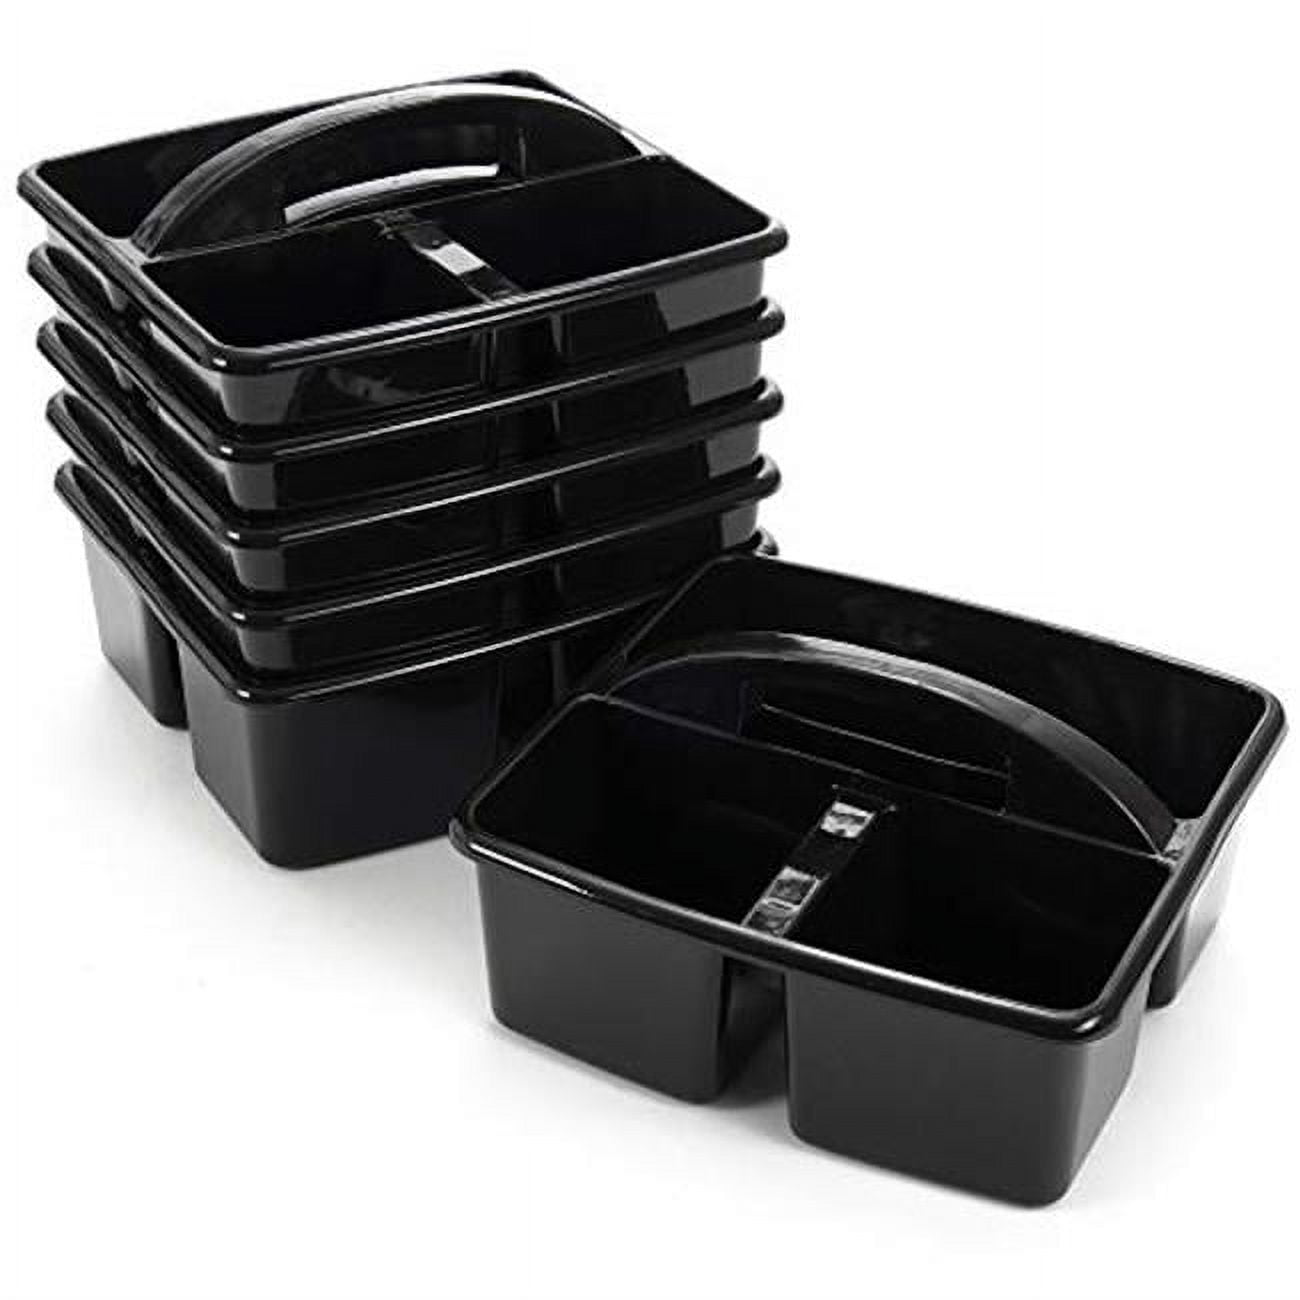 Ktbl-406 Table Condiment Caddy, Black - Pack Of 6